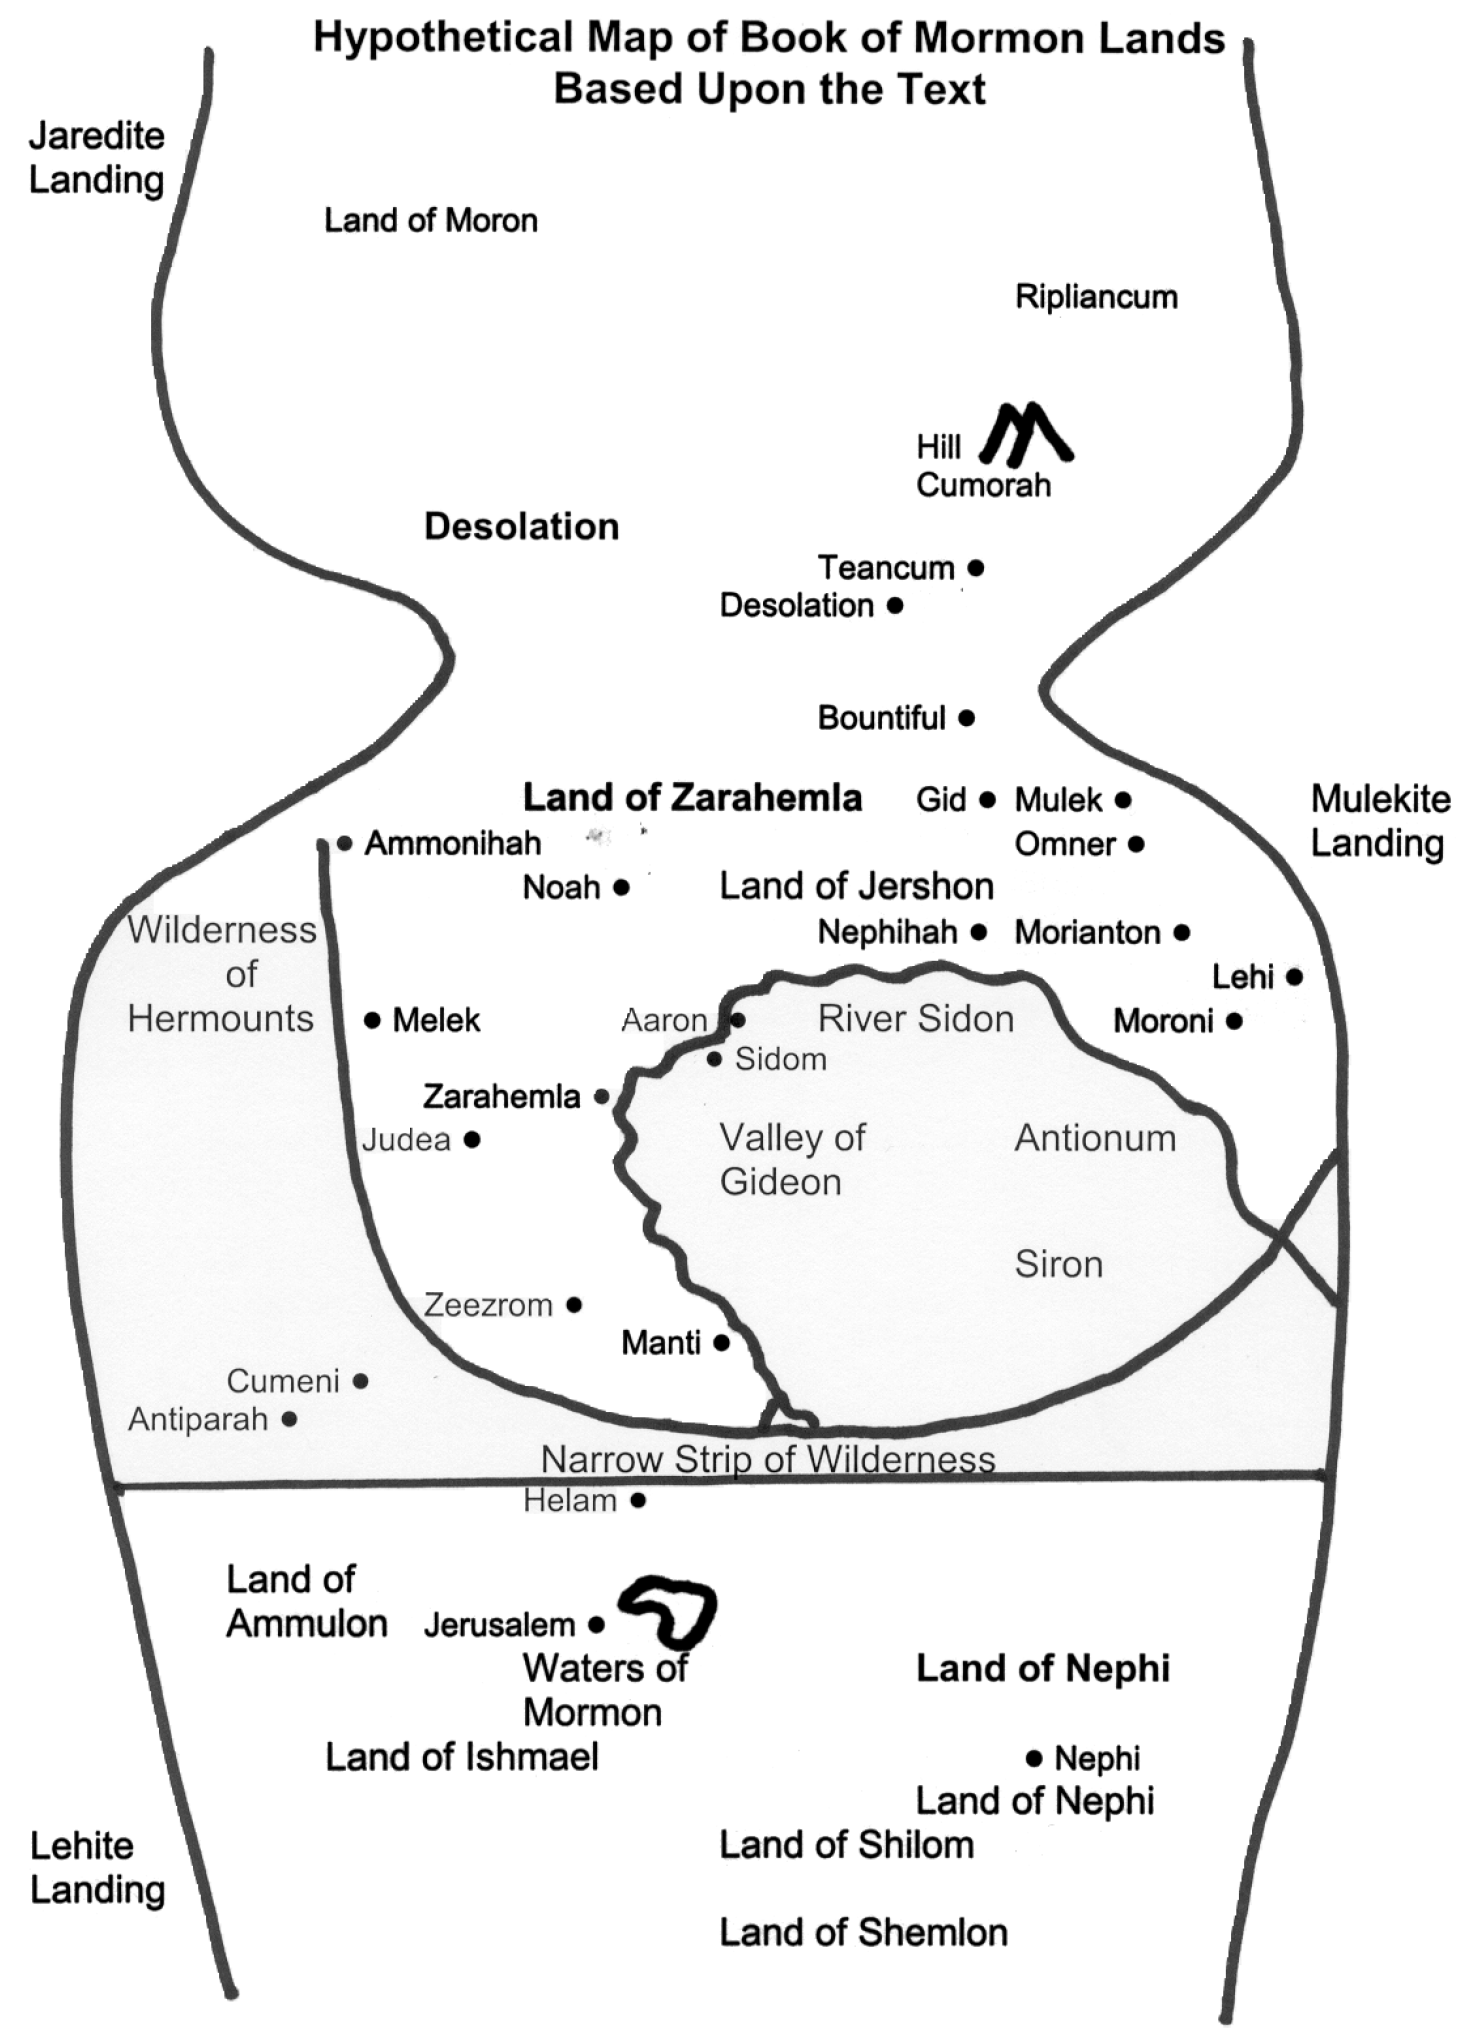 Hypothetical Map of Book of Mormon Lands